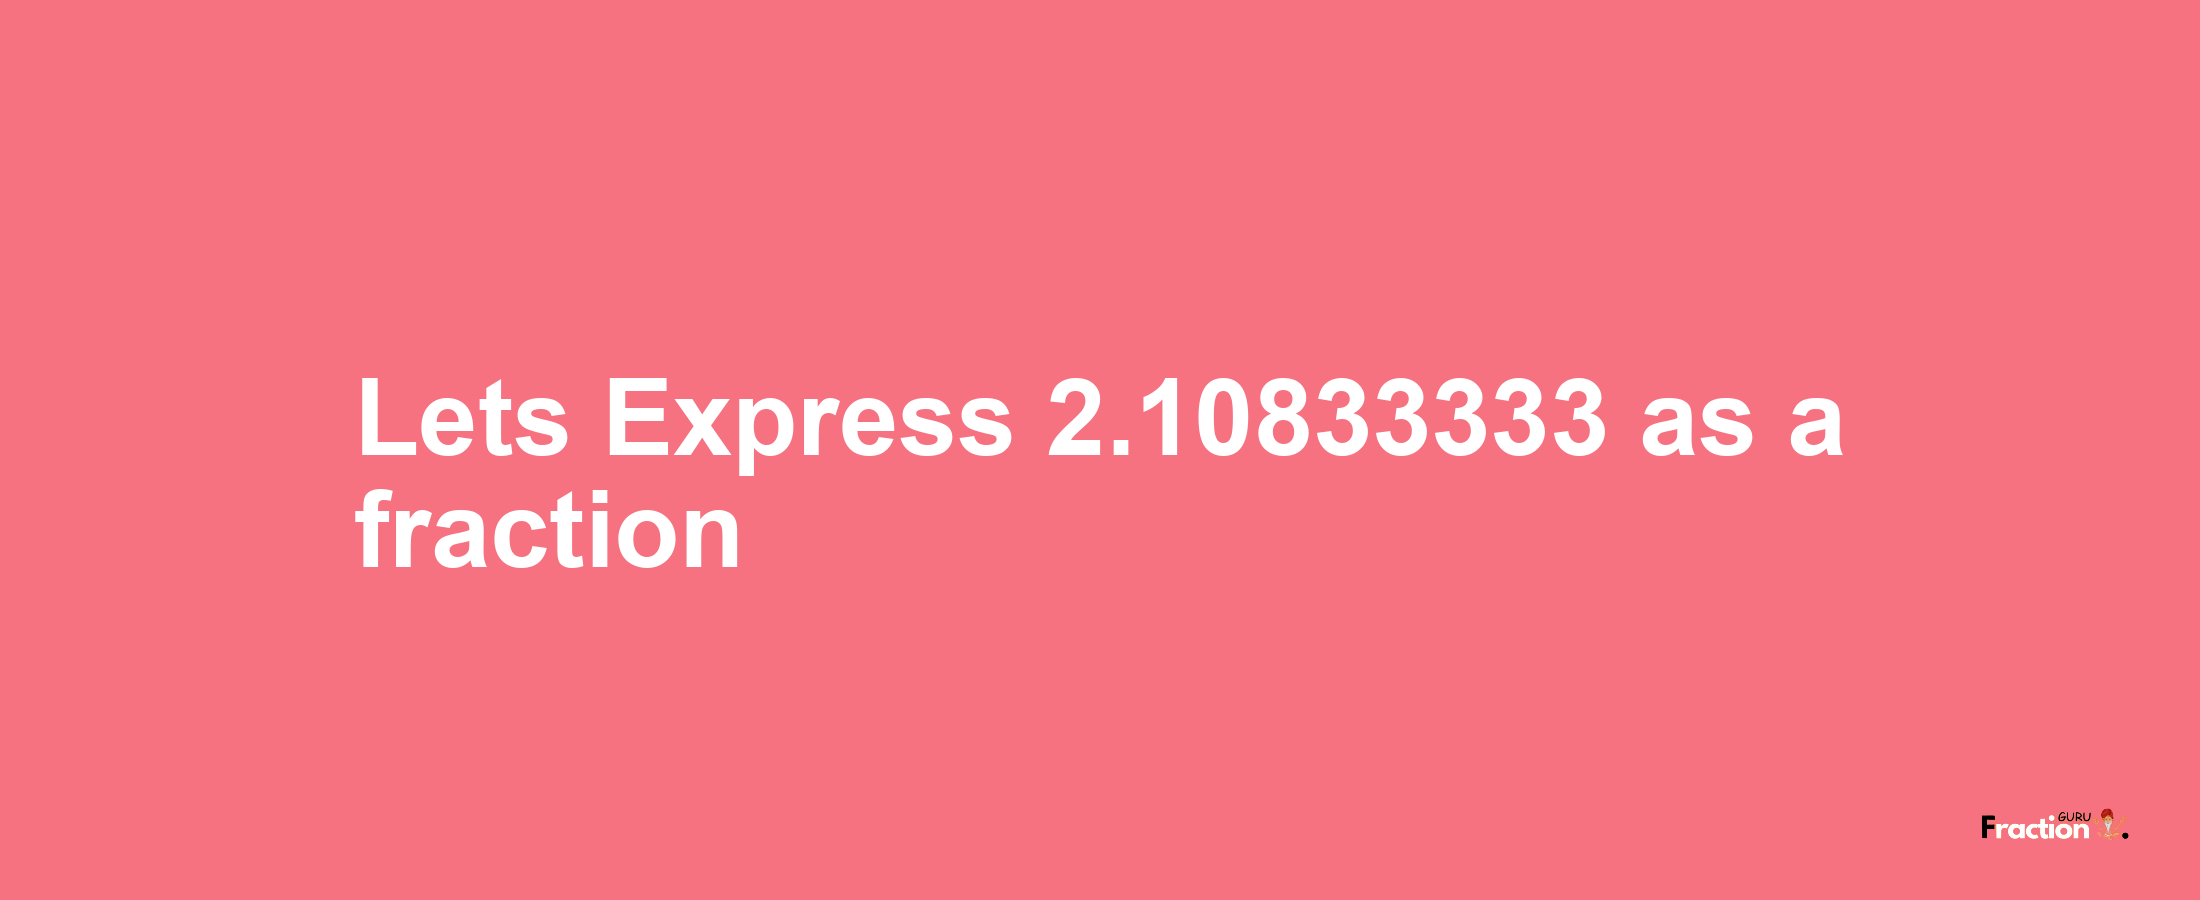 Lets Express 2.10833333 as afraction